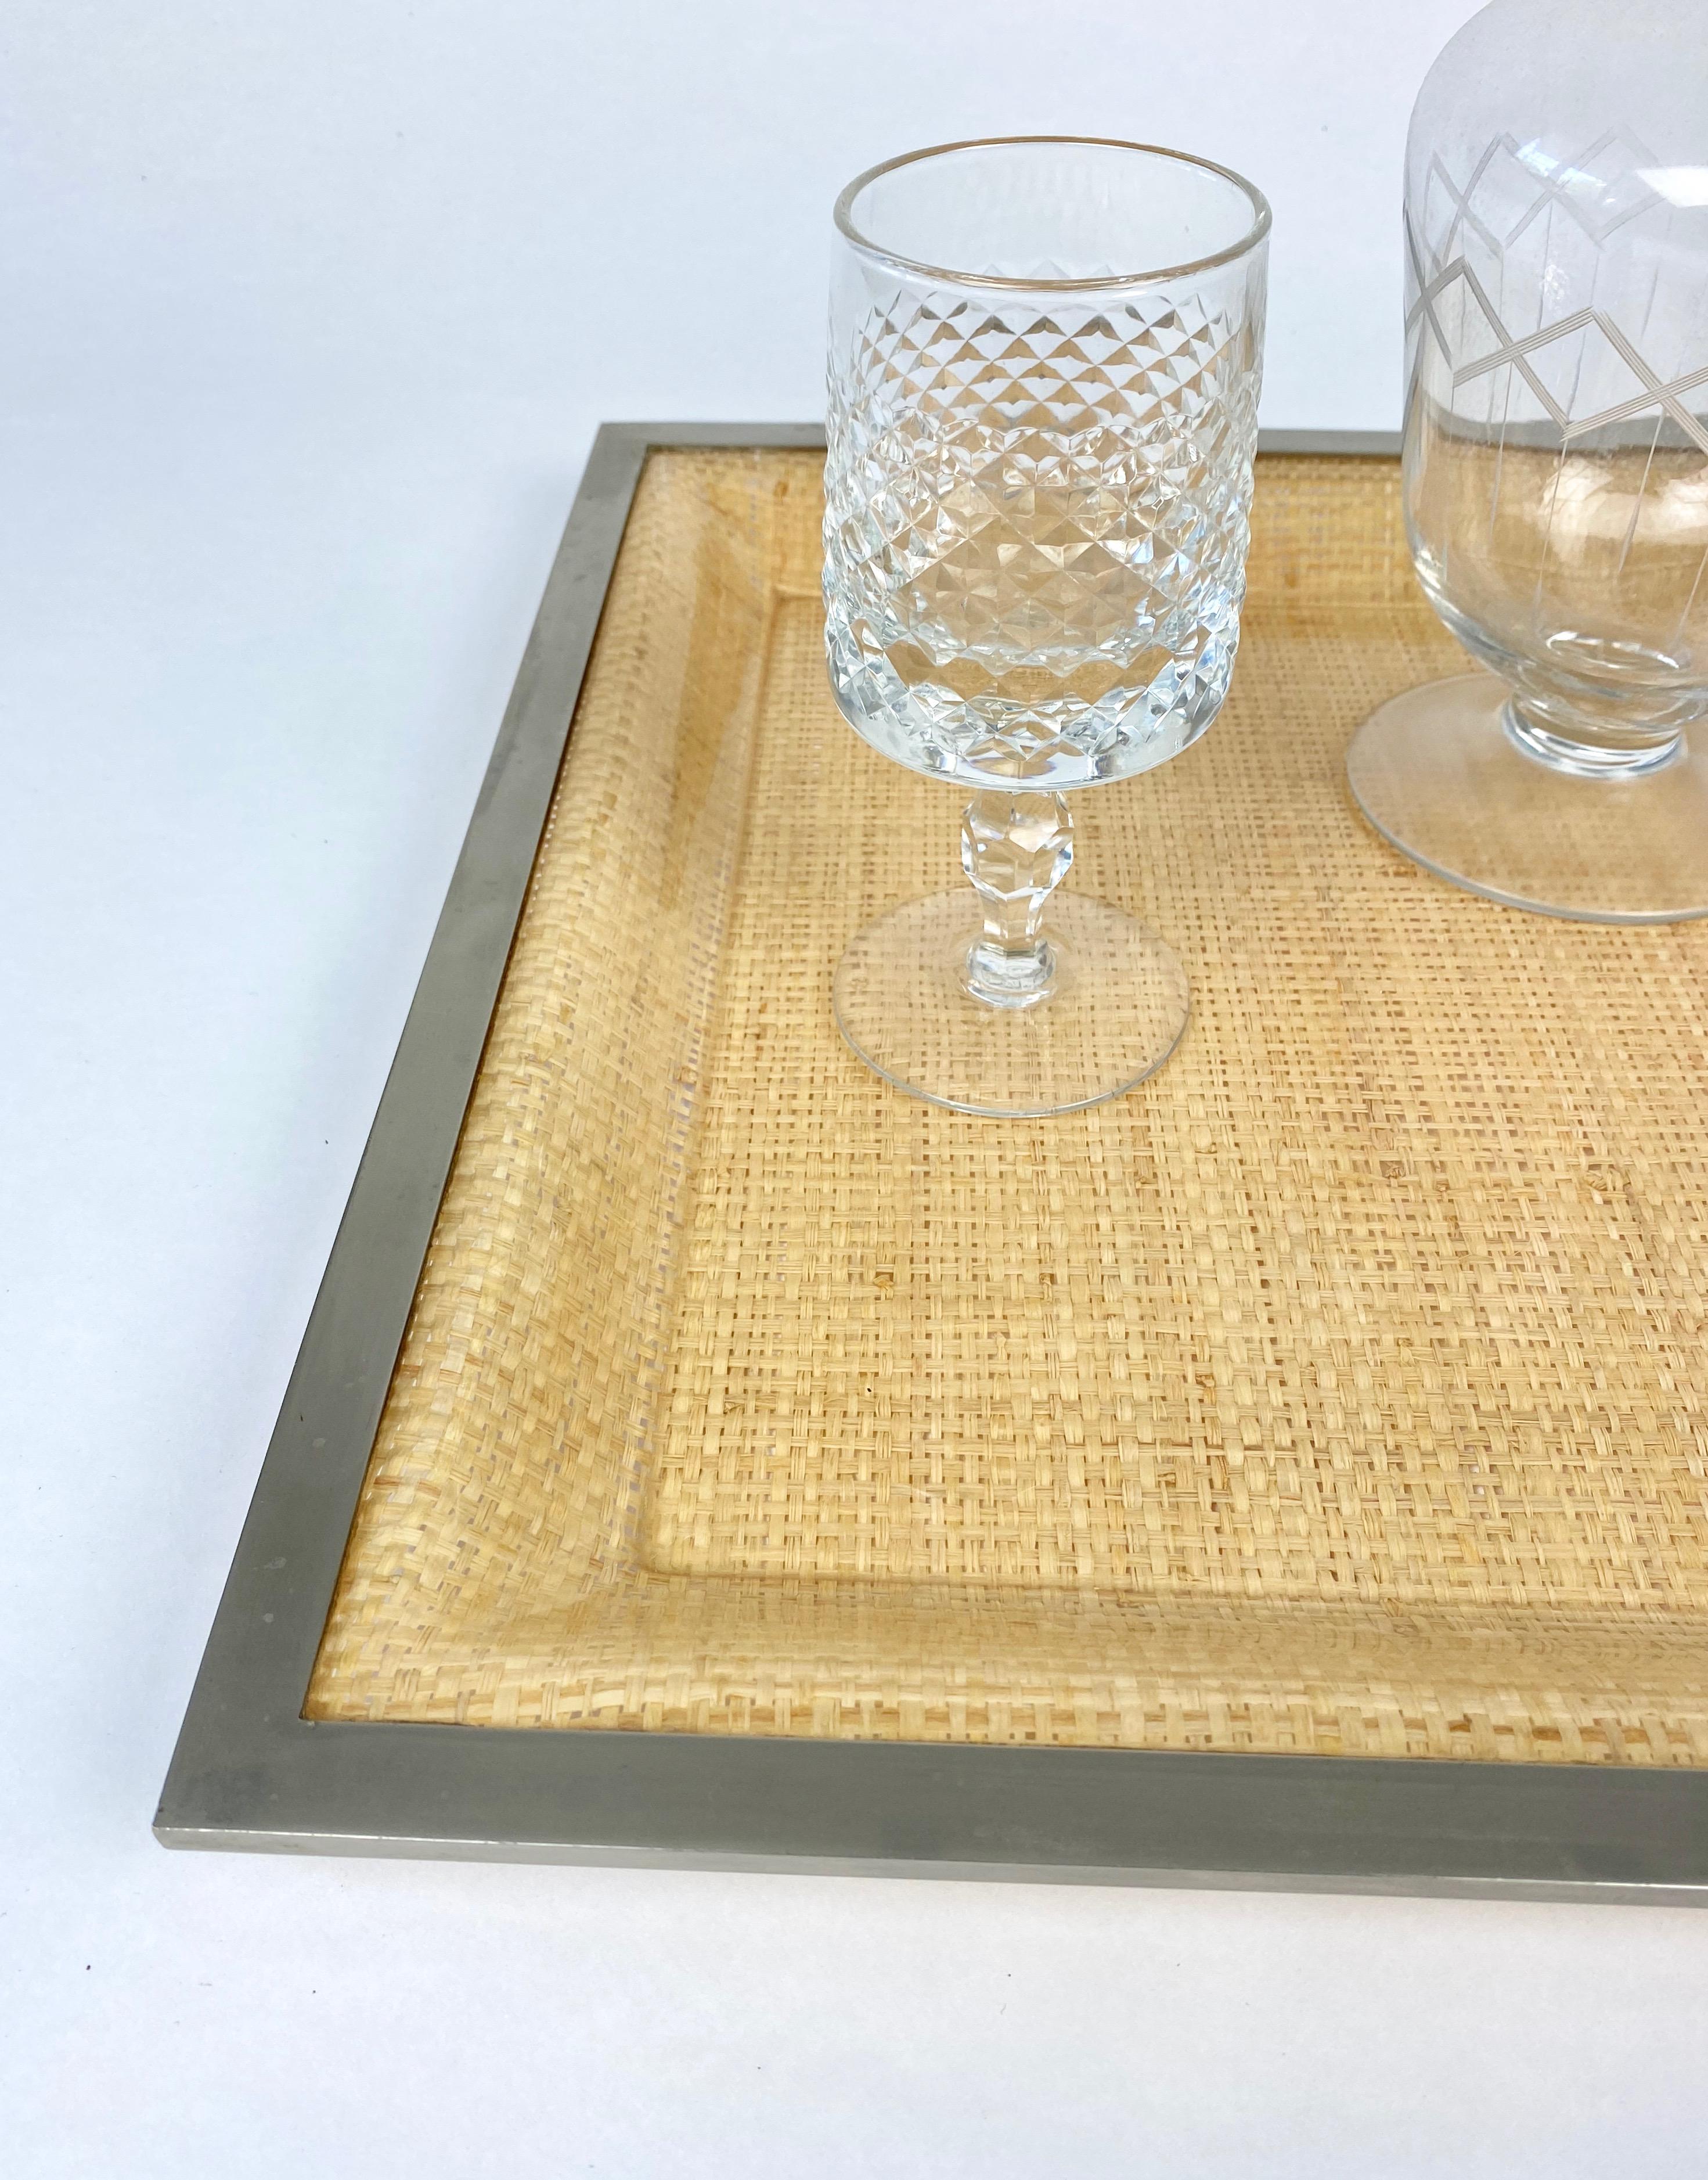 Wicker Lucite Serving Tray Metal Frame by Janetti, Italy, 1970s For Sale 4